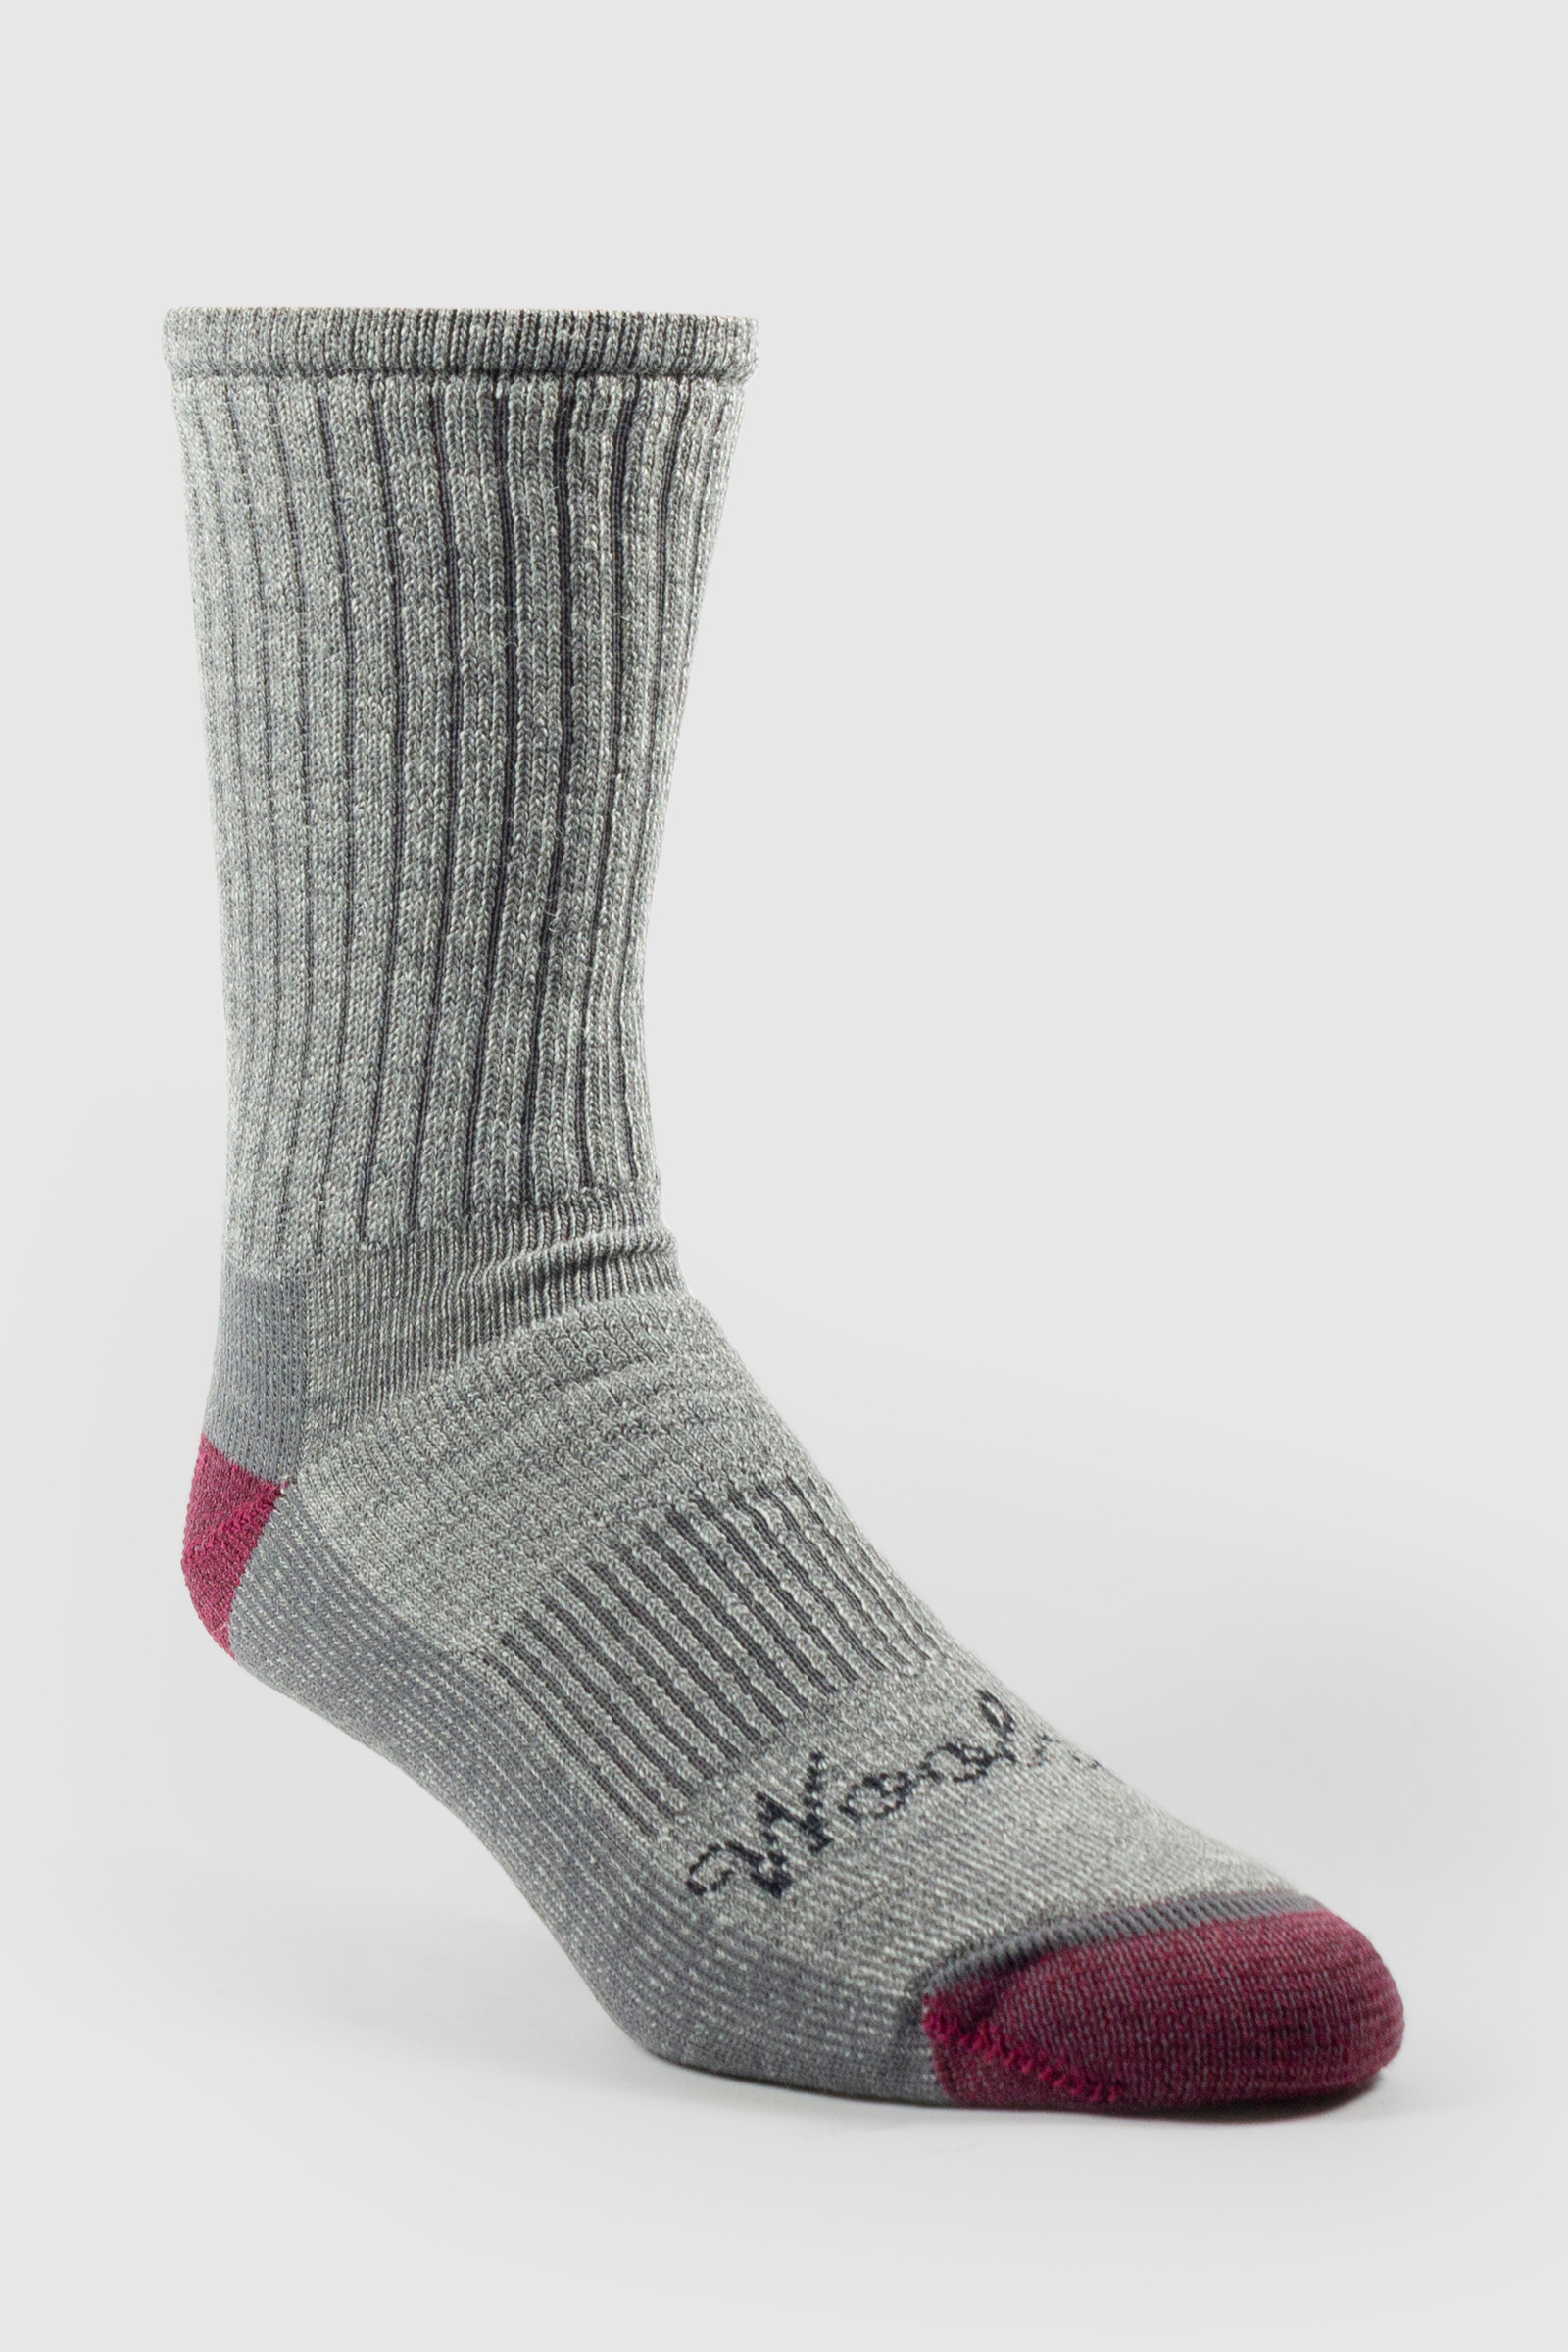 Men's Ten Mile Hiker Socks - Made in the USA Grey | Woolrich USA